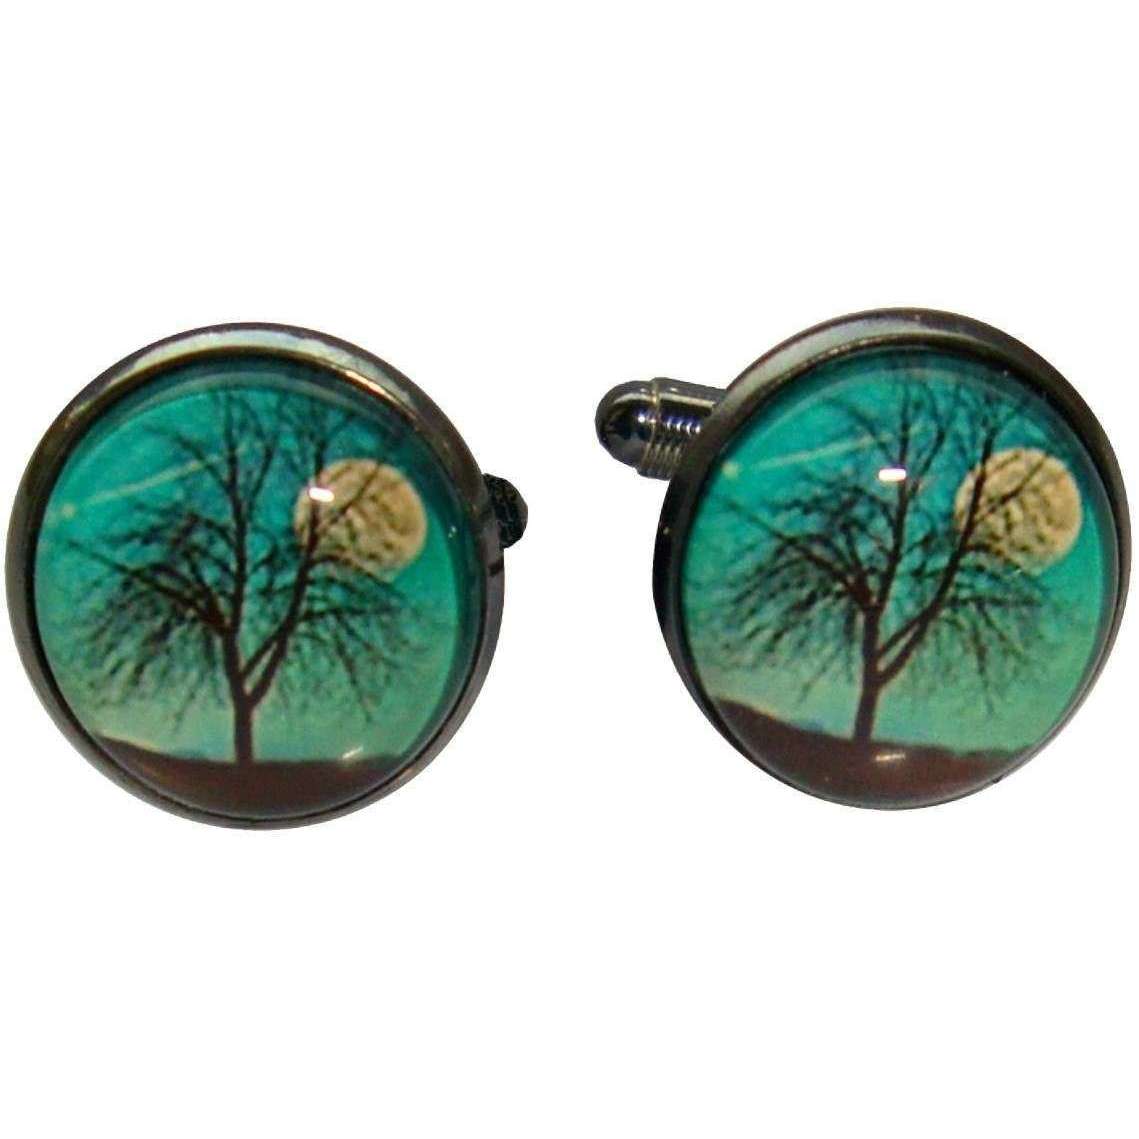 Bassin and Brown Leafless Tree and Moon Cufflinks - Blue/White/Black